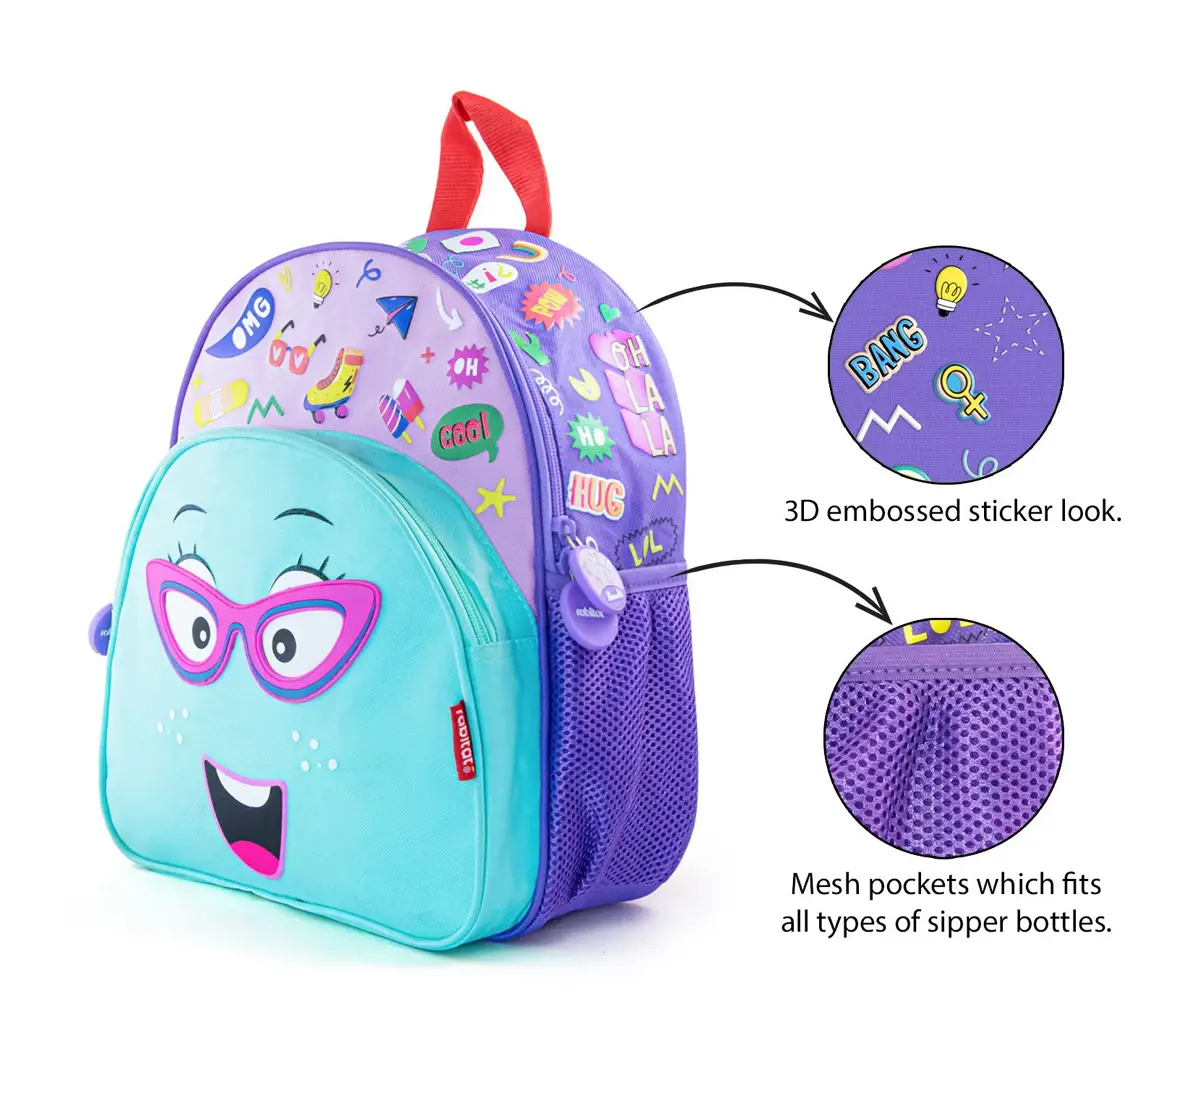 Rabitat Smash School Bag Chatter Box 12 Inches For Kids of Age 2Y+, Multicolour